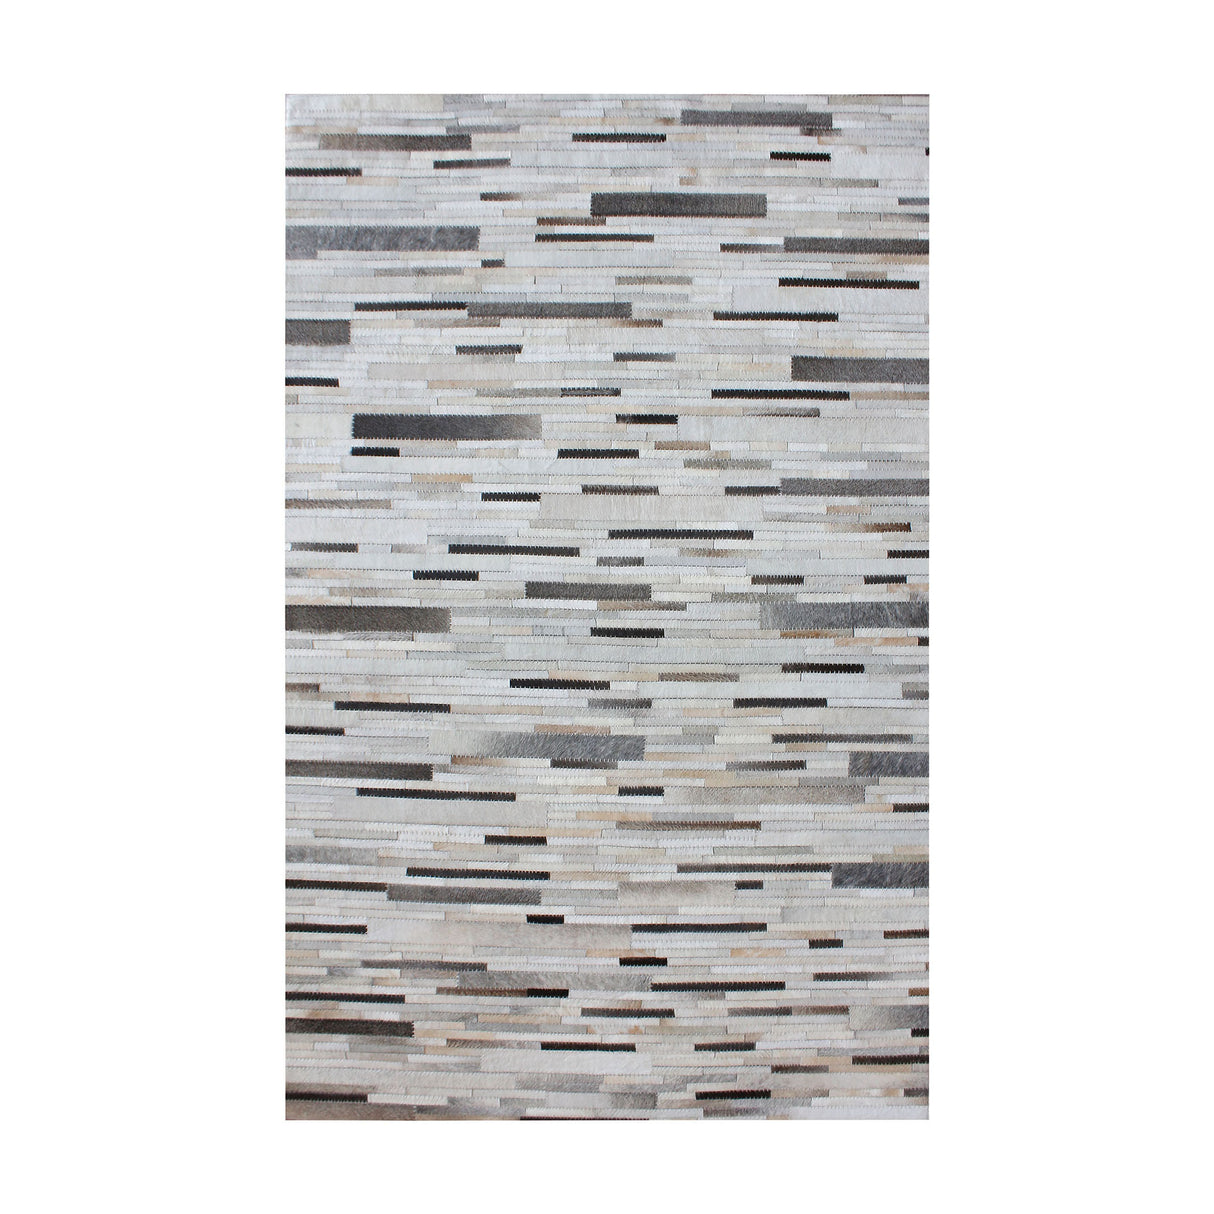 Elk 8905-374 Joico Hand-Stitched Leather Patchwork Rug